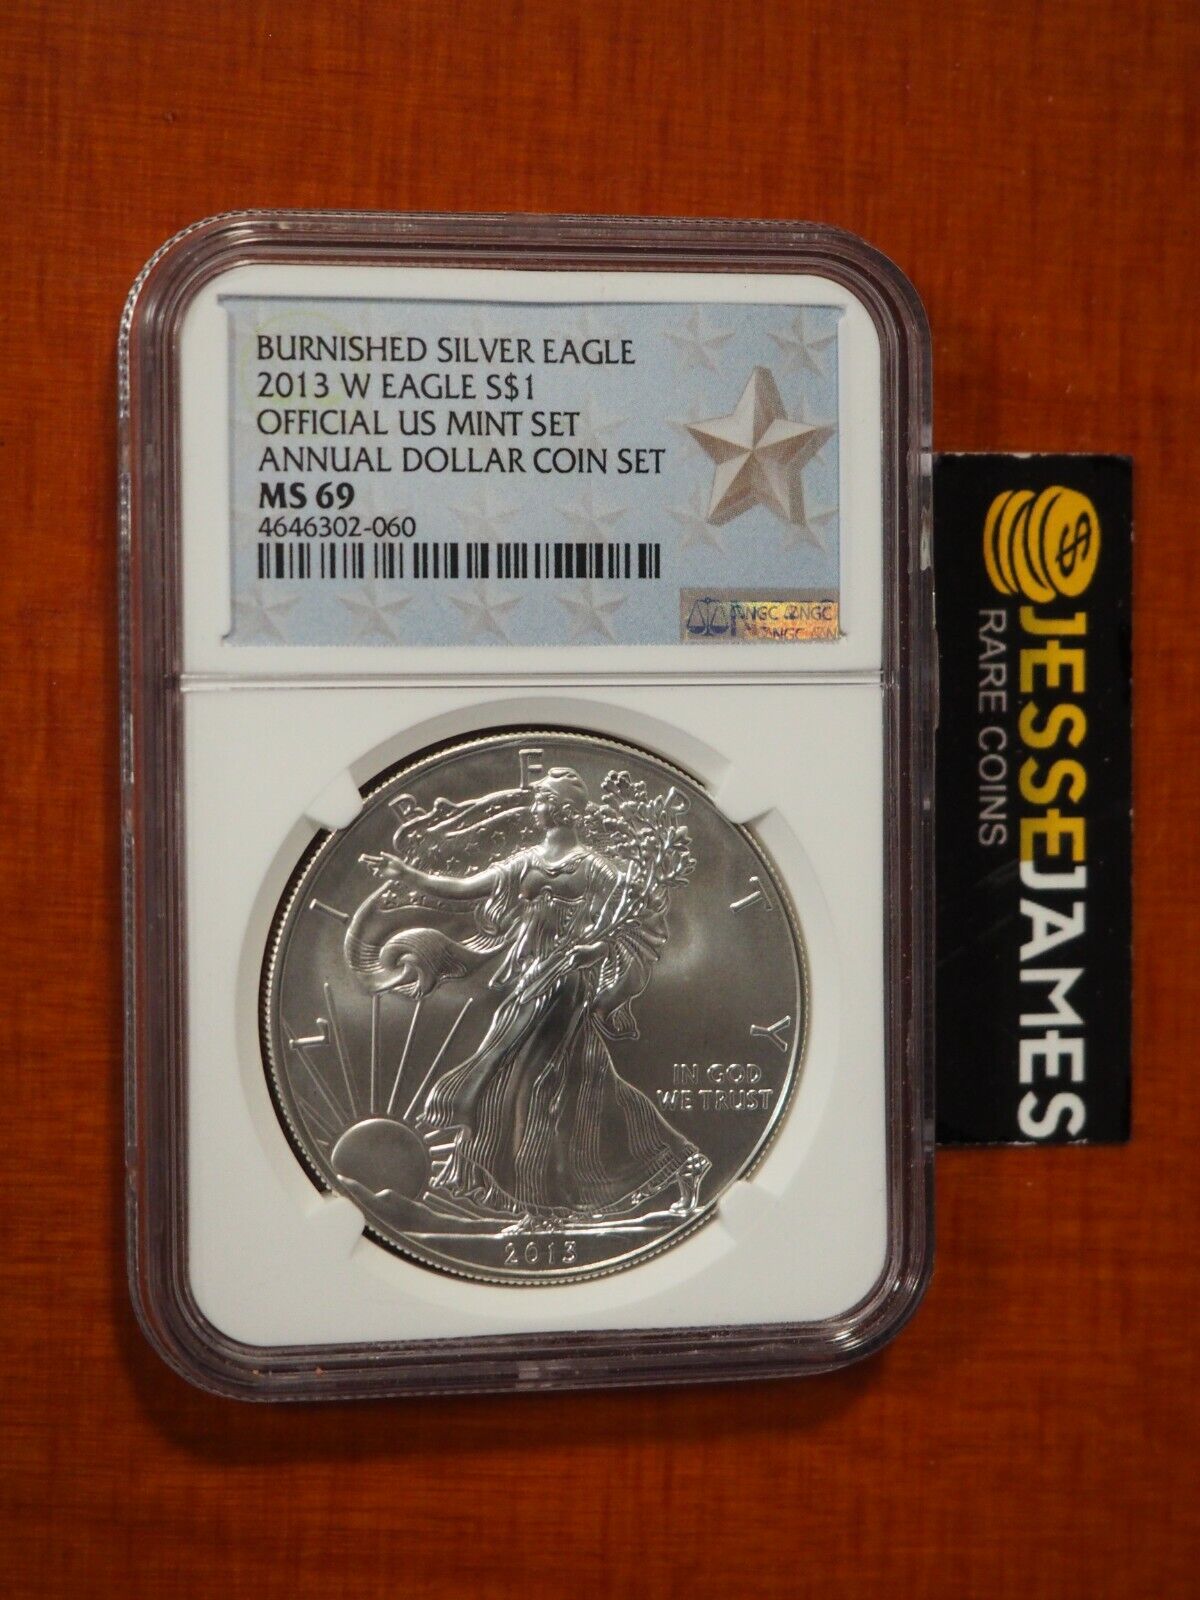 2013 W BURNISHED SILVER EAGLE NGC MS69 FROM ANNUAL DOLLAR COIN SET STAR LABEL